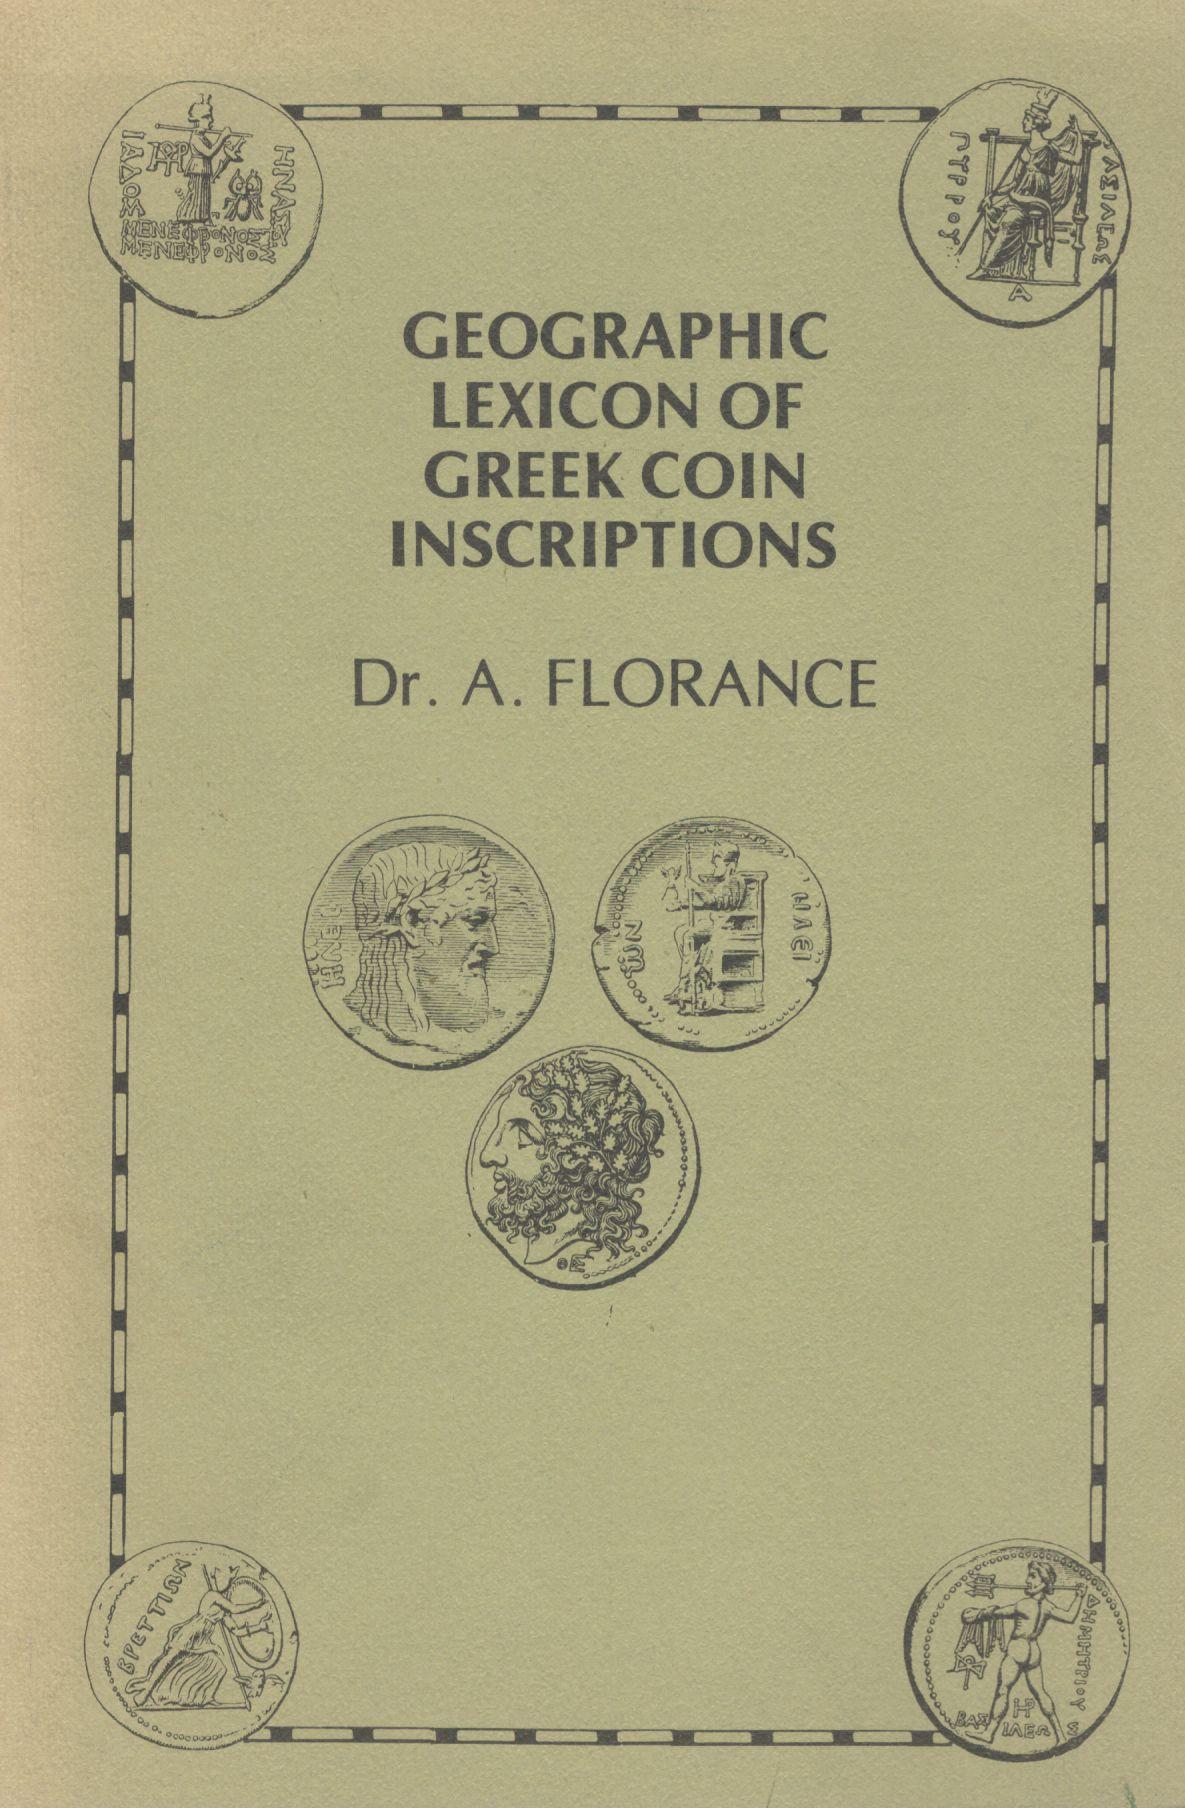 GEOGRAPHIC LEXICON OF GREEK COIN INSCRIPTIONS